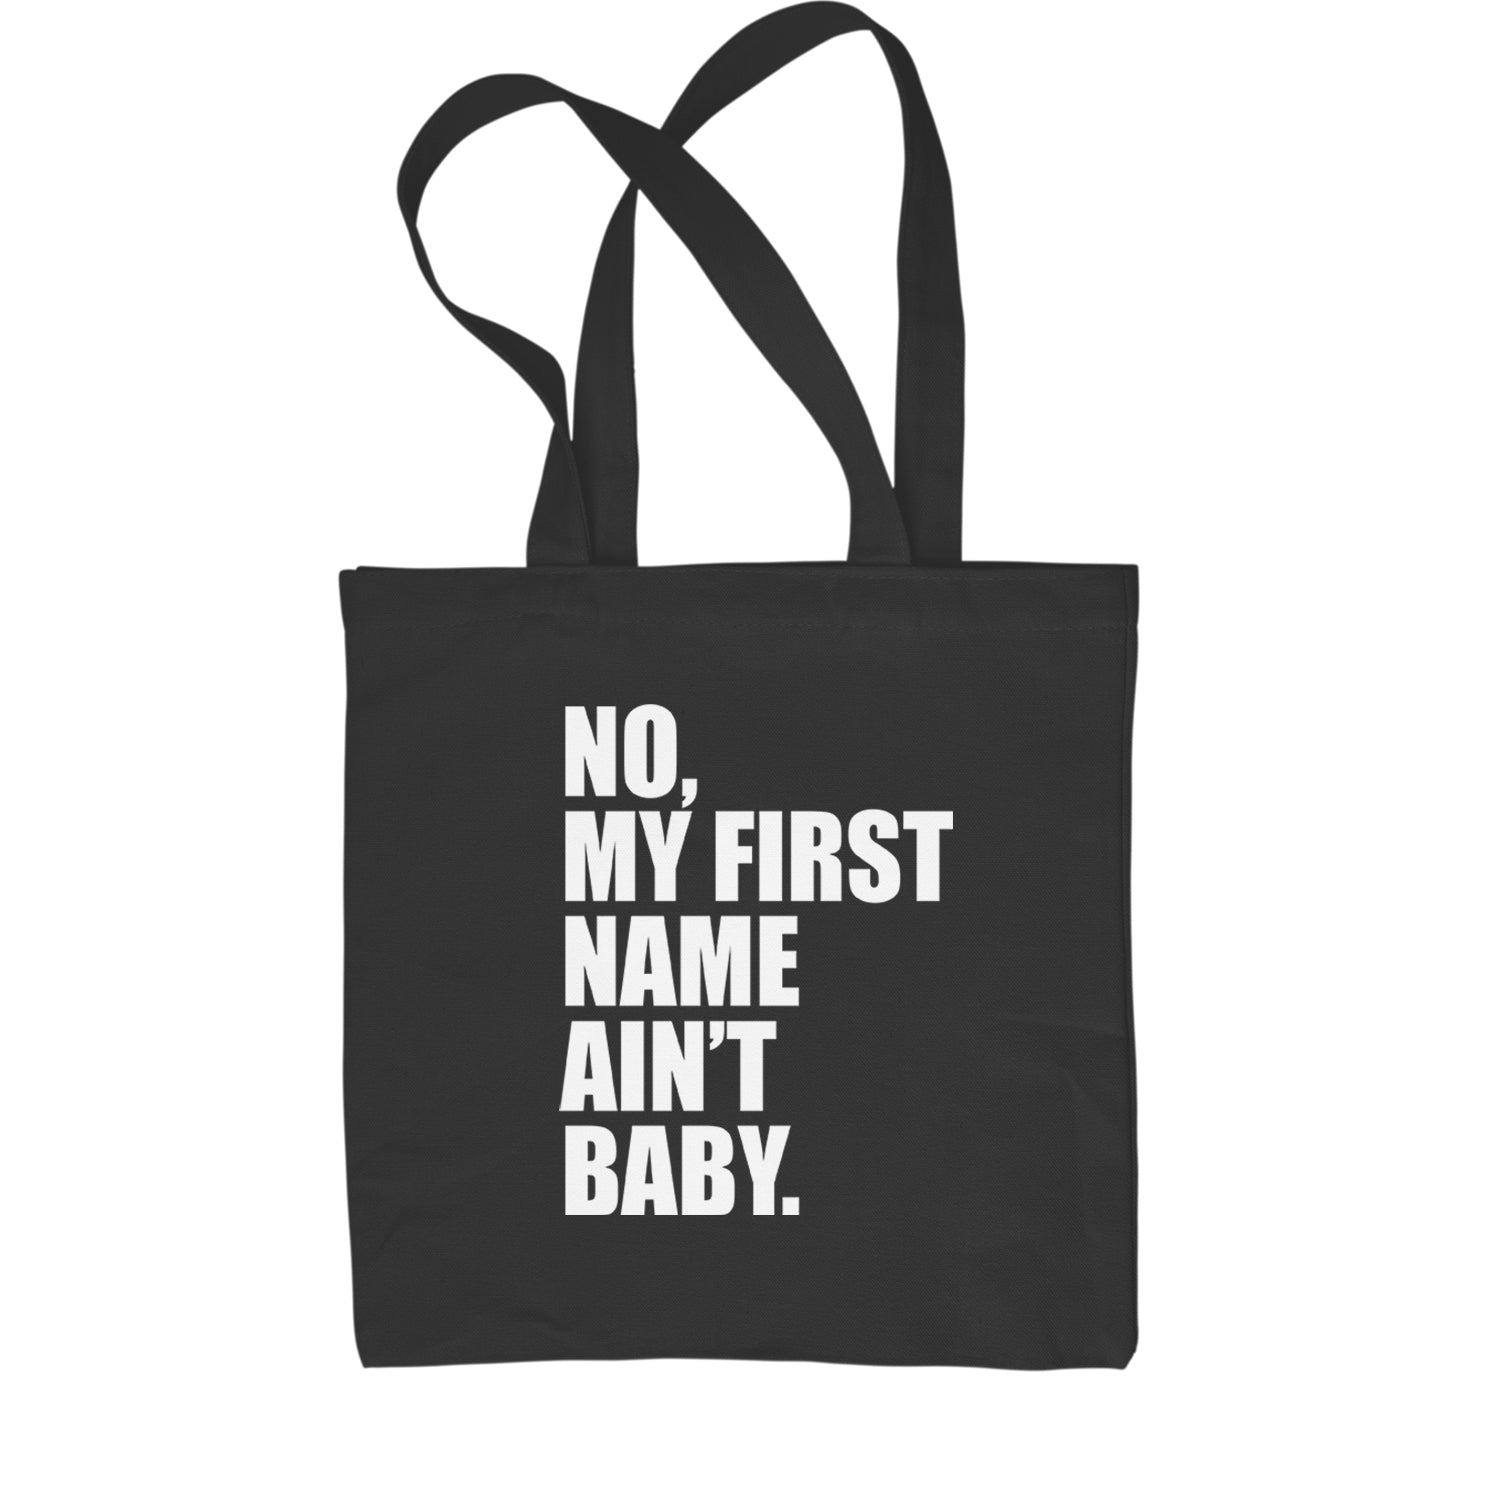 No My First Name Ain't Baby Together Again Shopping Tote Bag